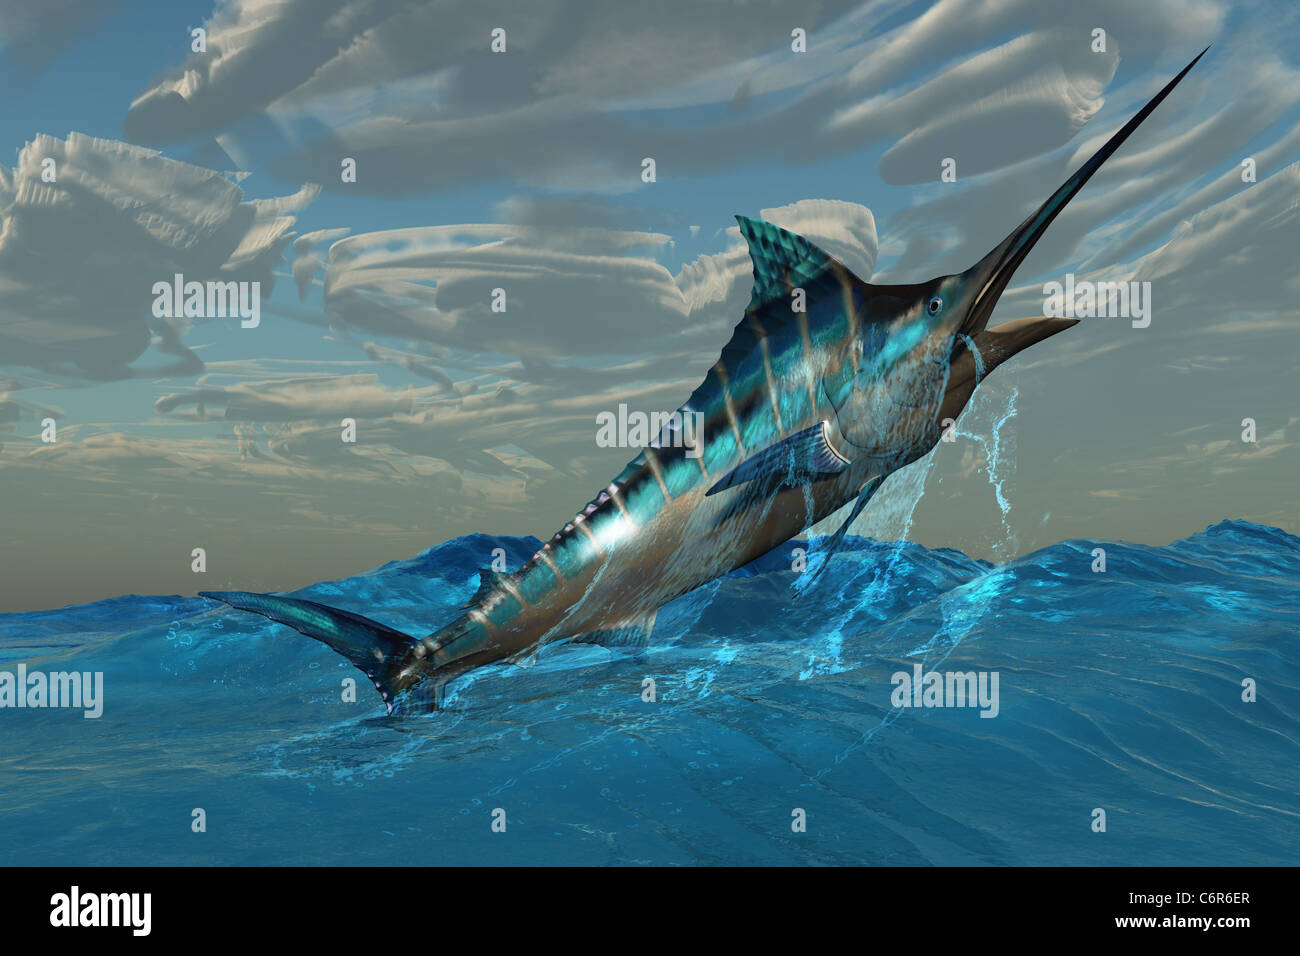 An iridescent Blue Marlin bursts from ocean waters with with marvelous energy. Stock Photo